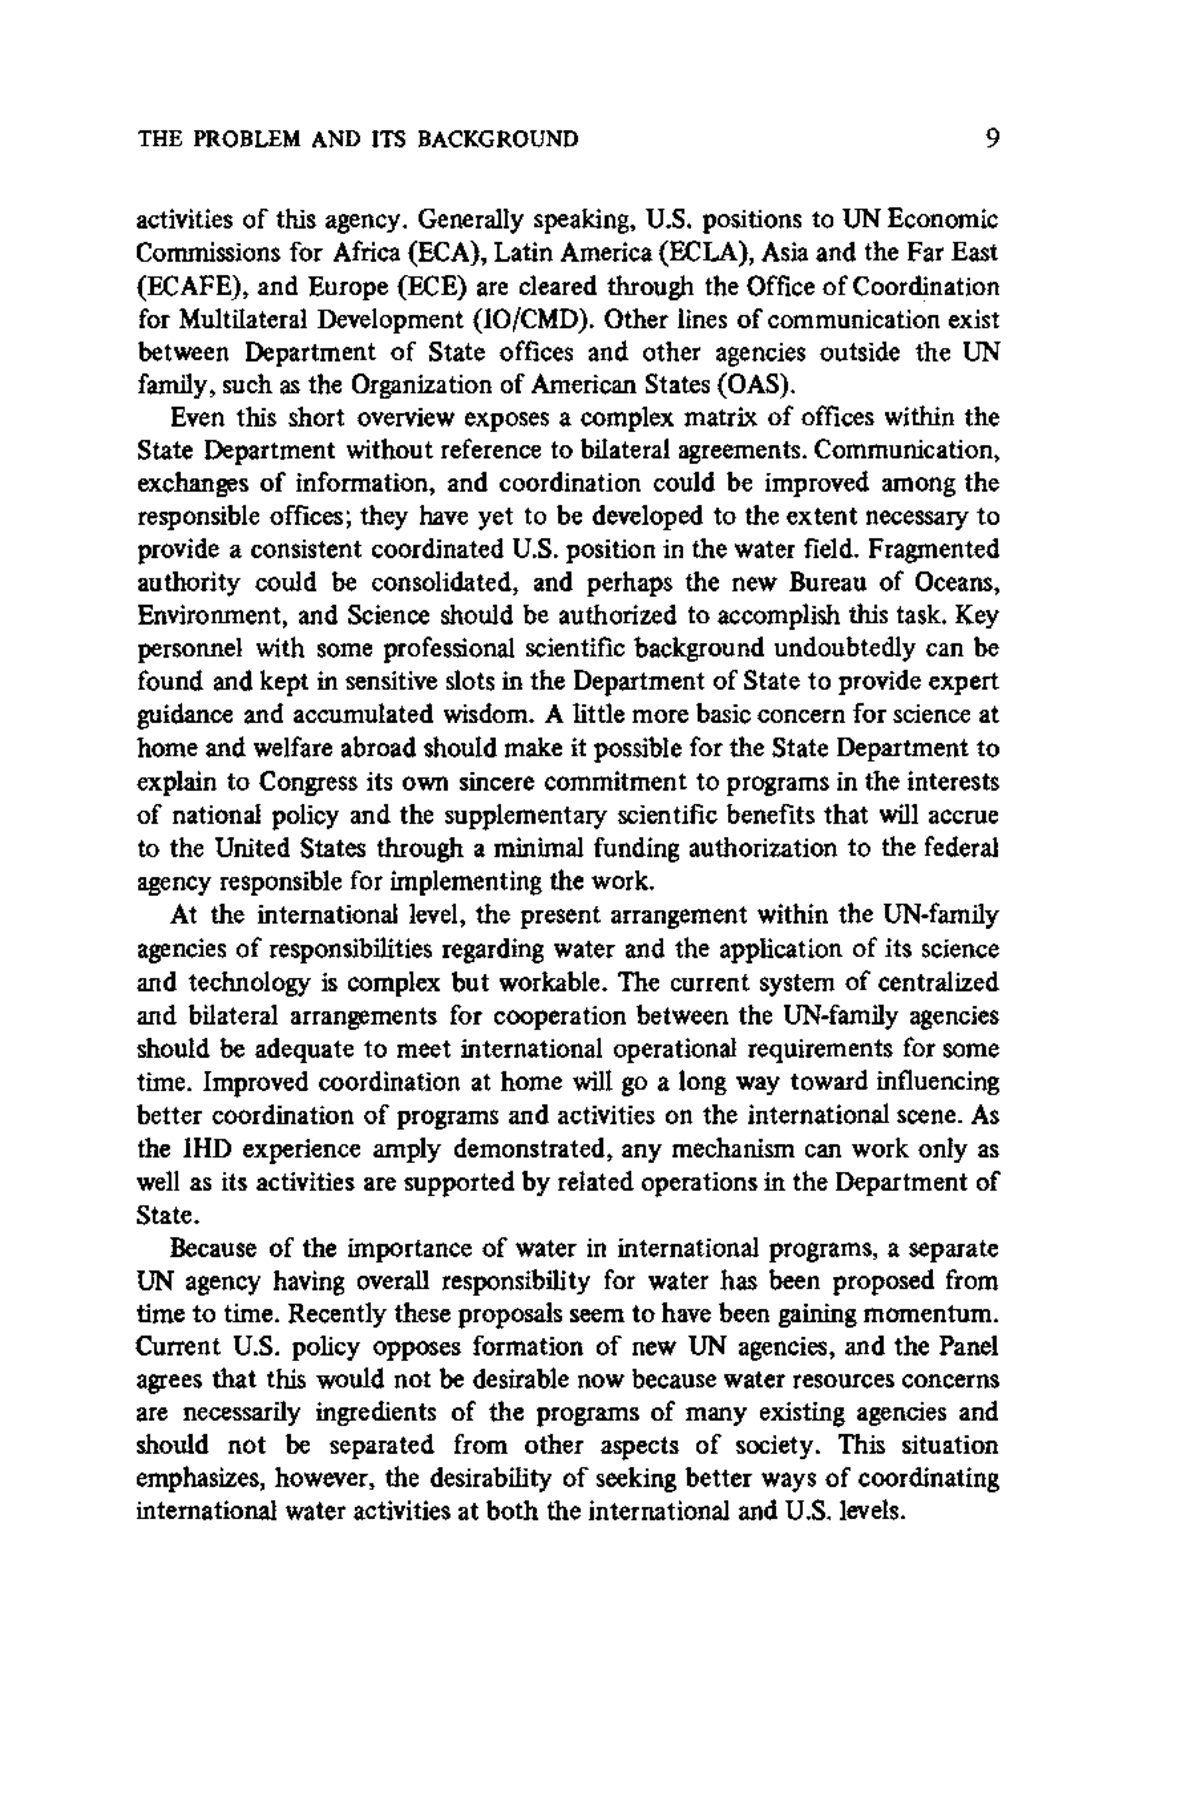 THE PROBLEM AND ITS BACKGROUND | United States Participation in the  International Hydrological Program 1975-: A Report of the Panel on  Post-Decade Procedures to the . National Committee for the International  Hydrological